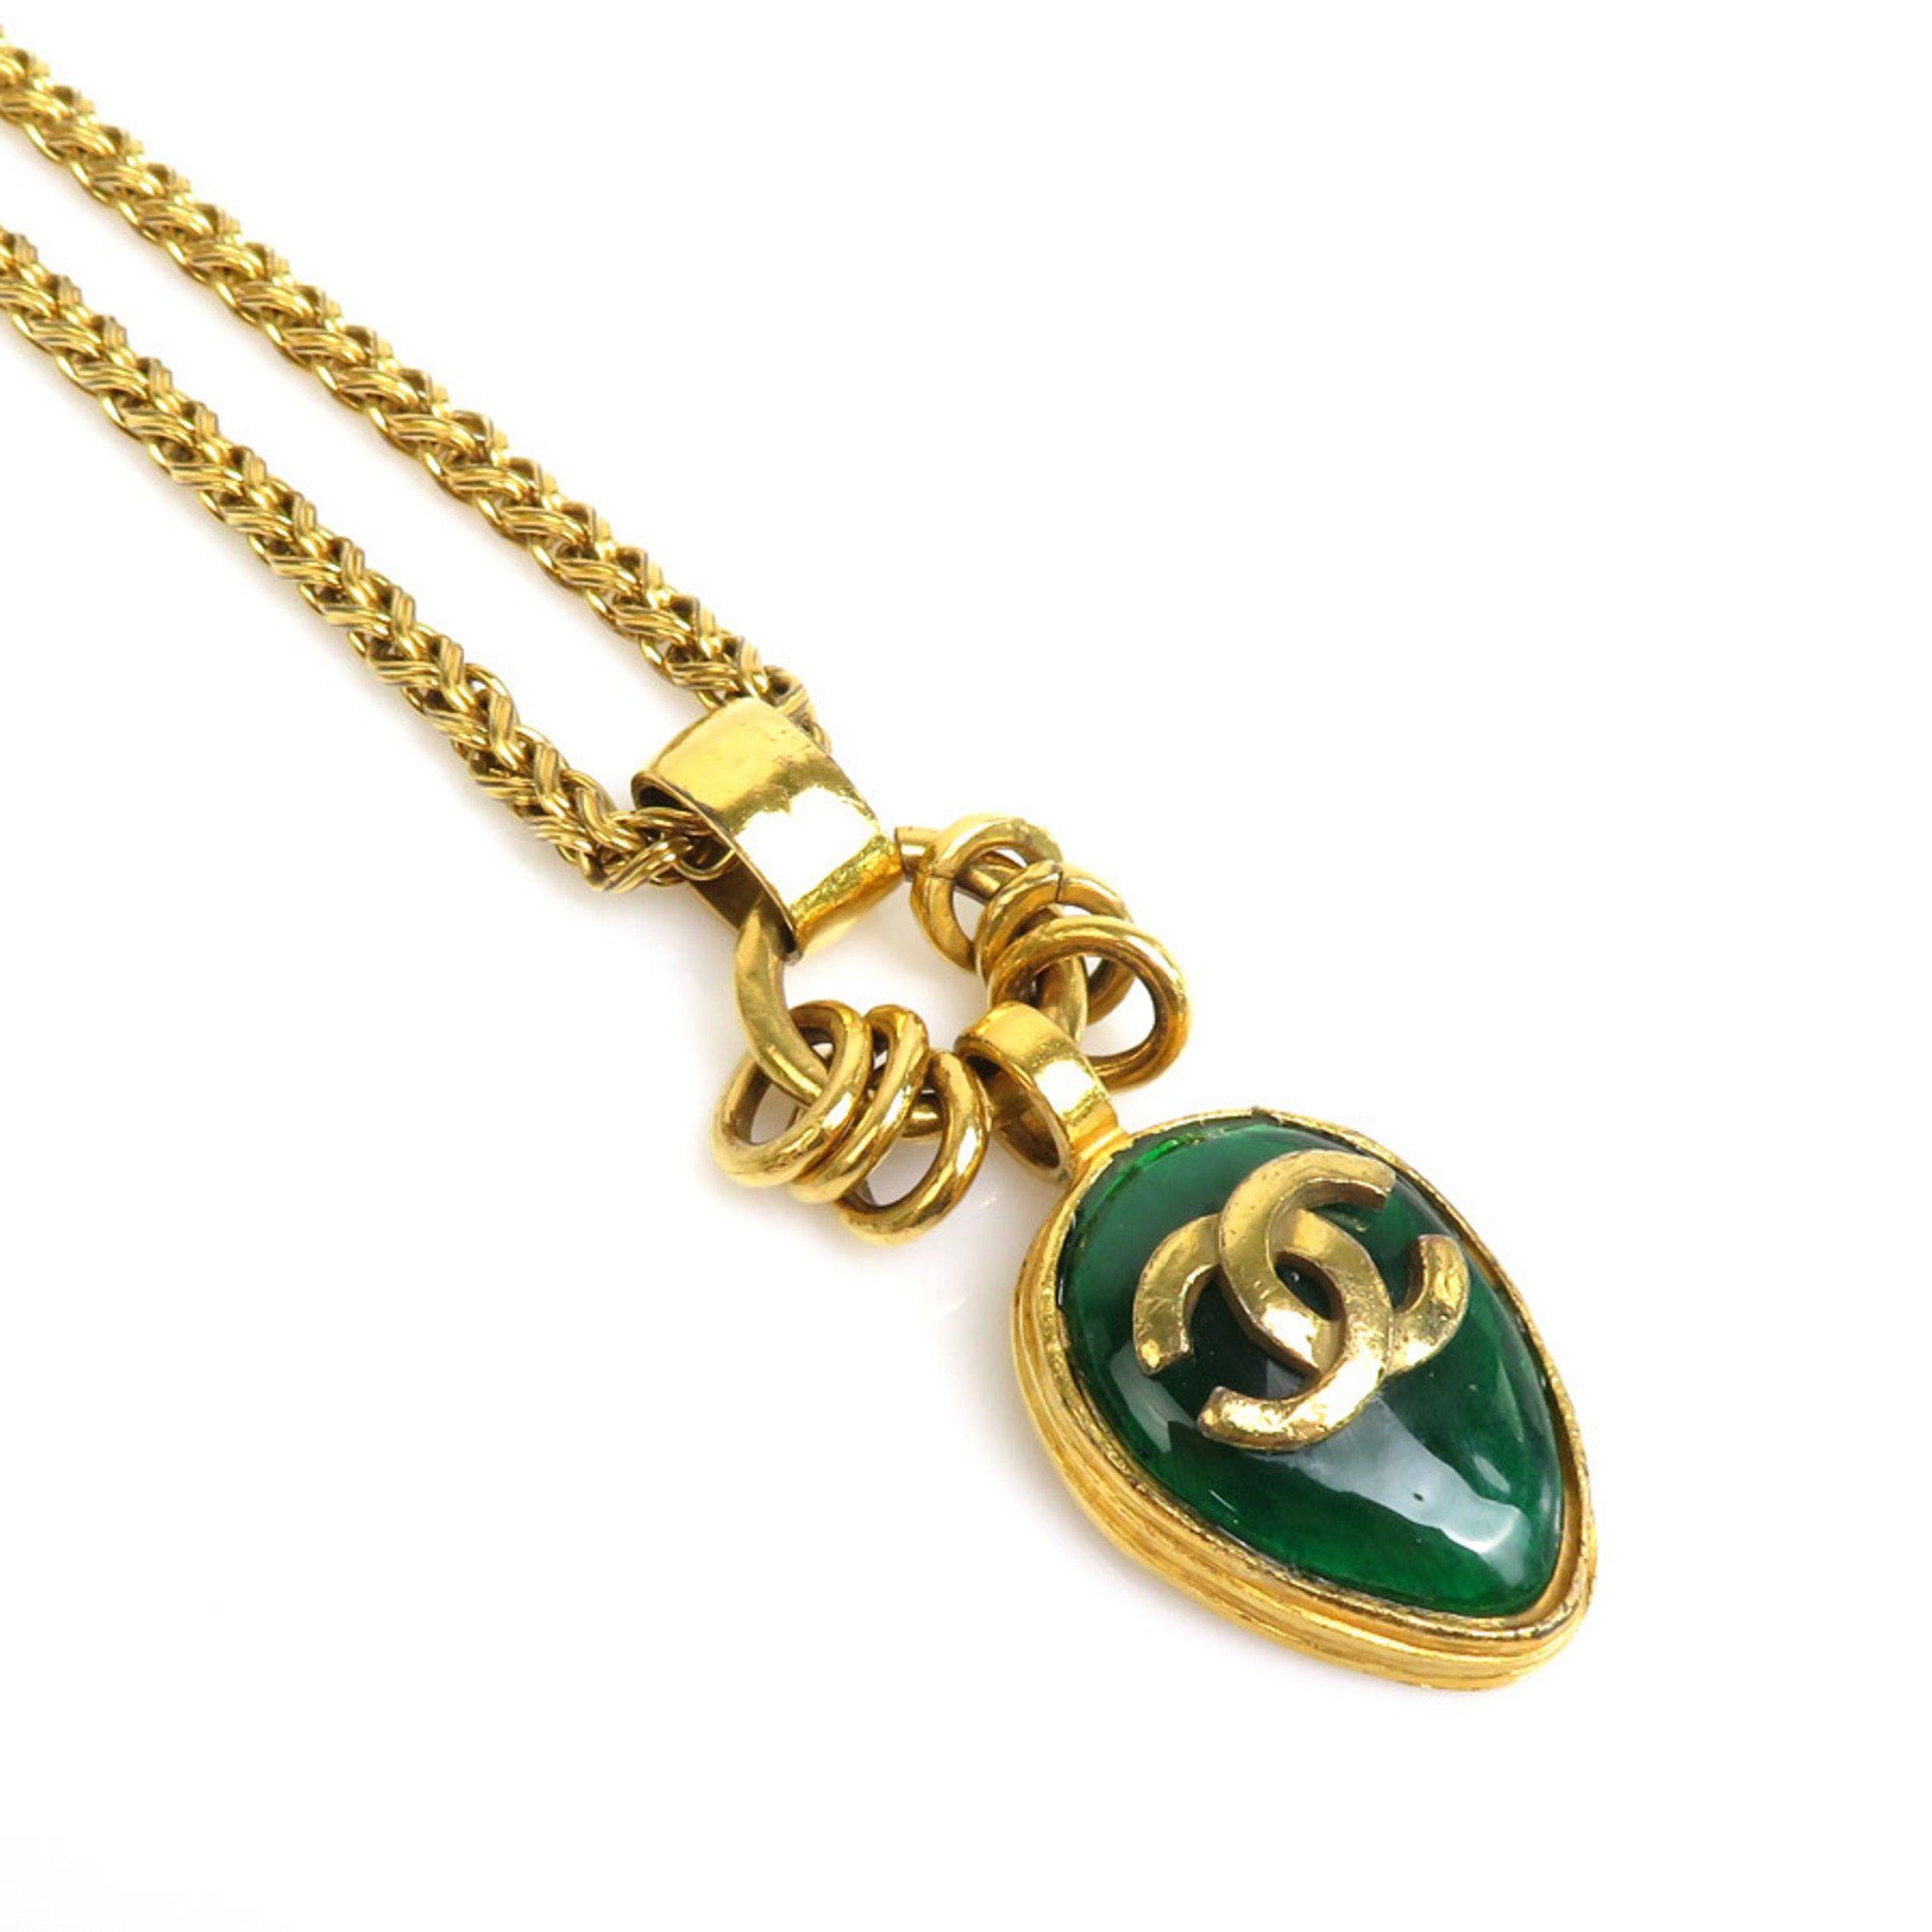 Chanel CHANEL Necklace Coco Mark Metal/Glass Stone Gold/Green Ladies